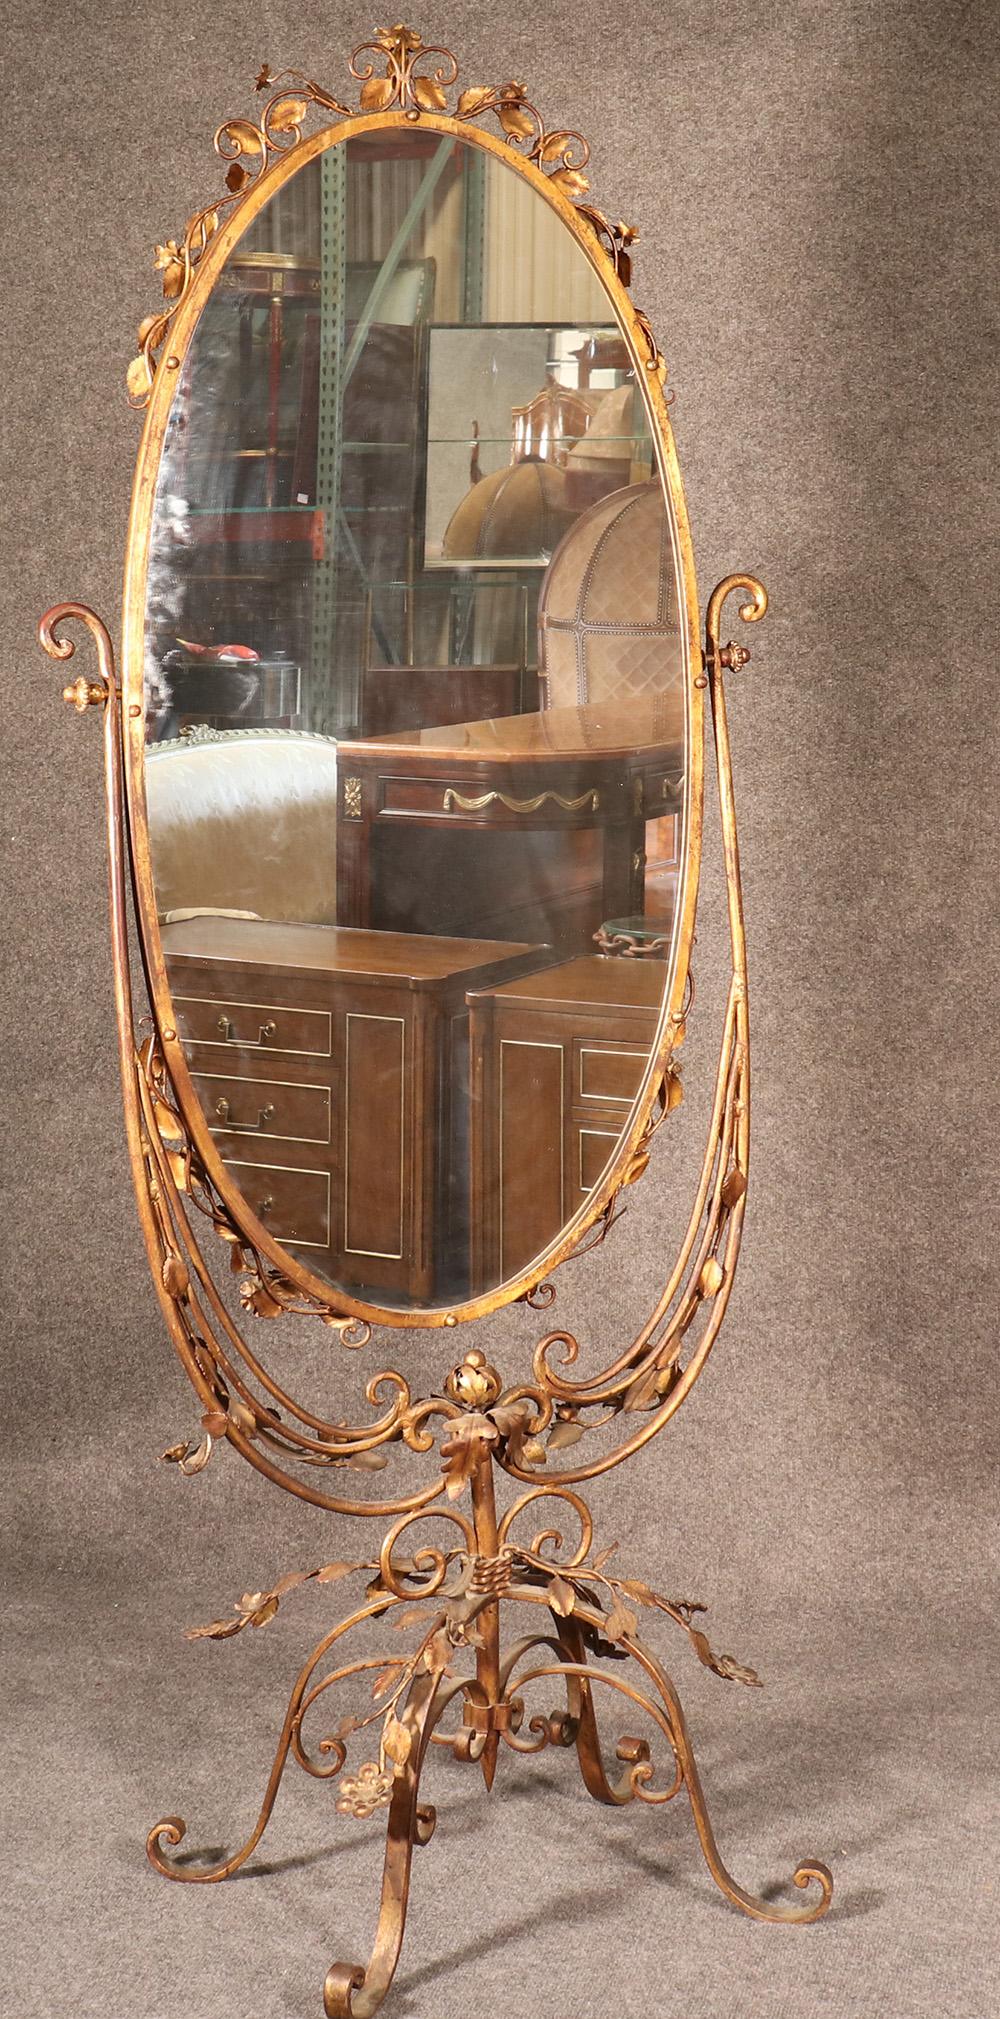 Metal Gilded Wrought Iron Tole Double Sided Wedding Shop Cheval Mirror, circa 1920s